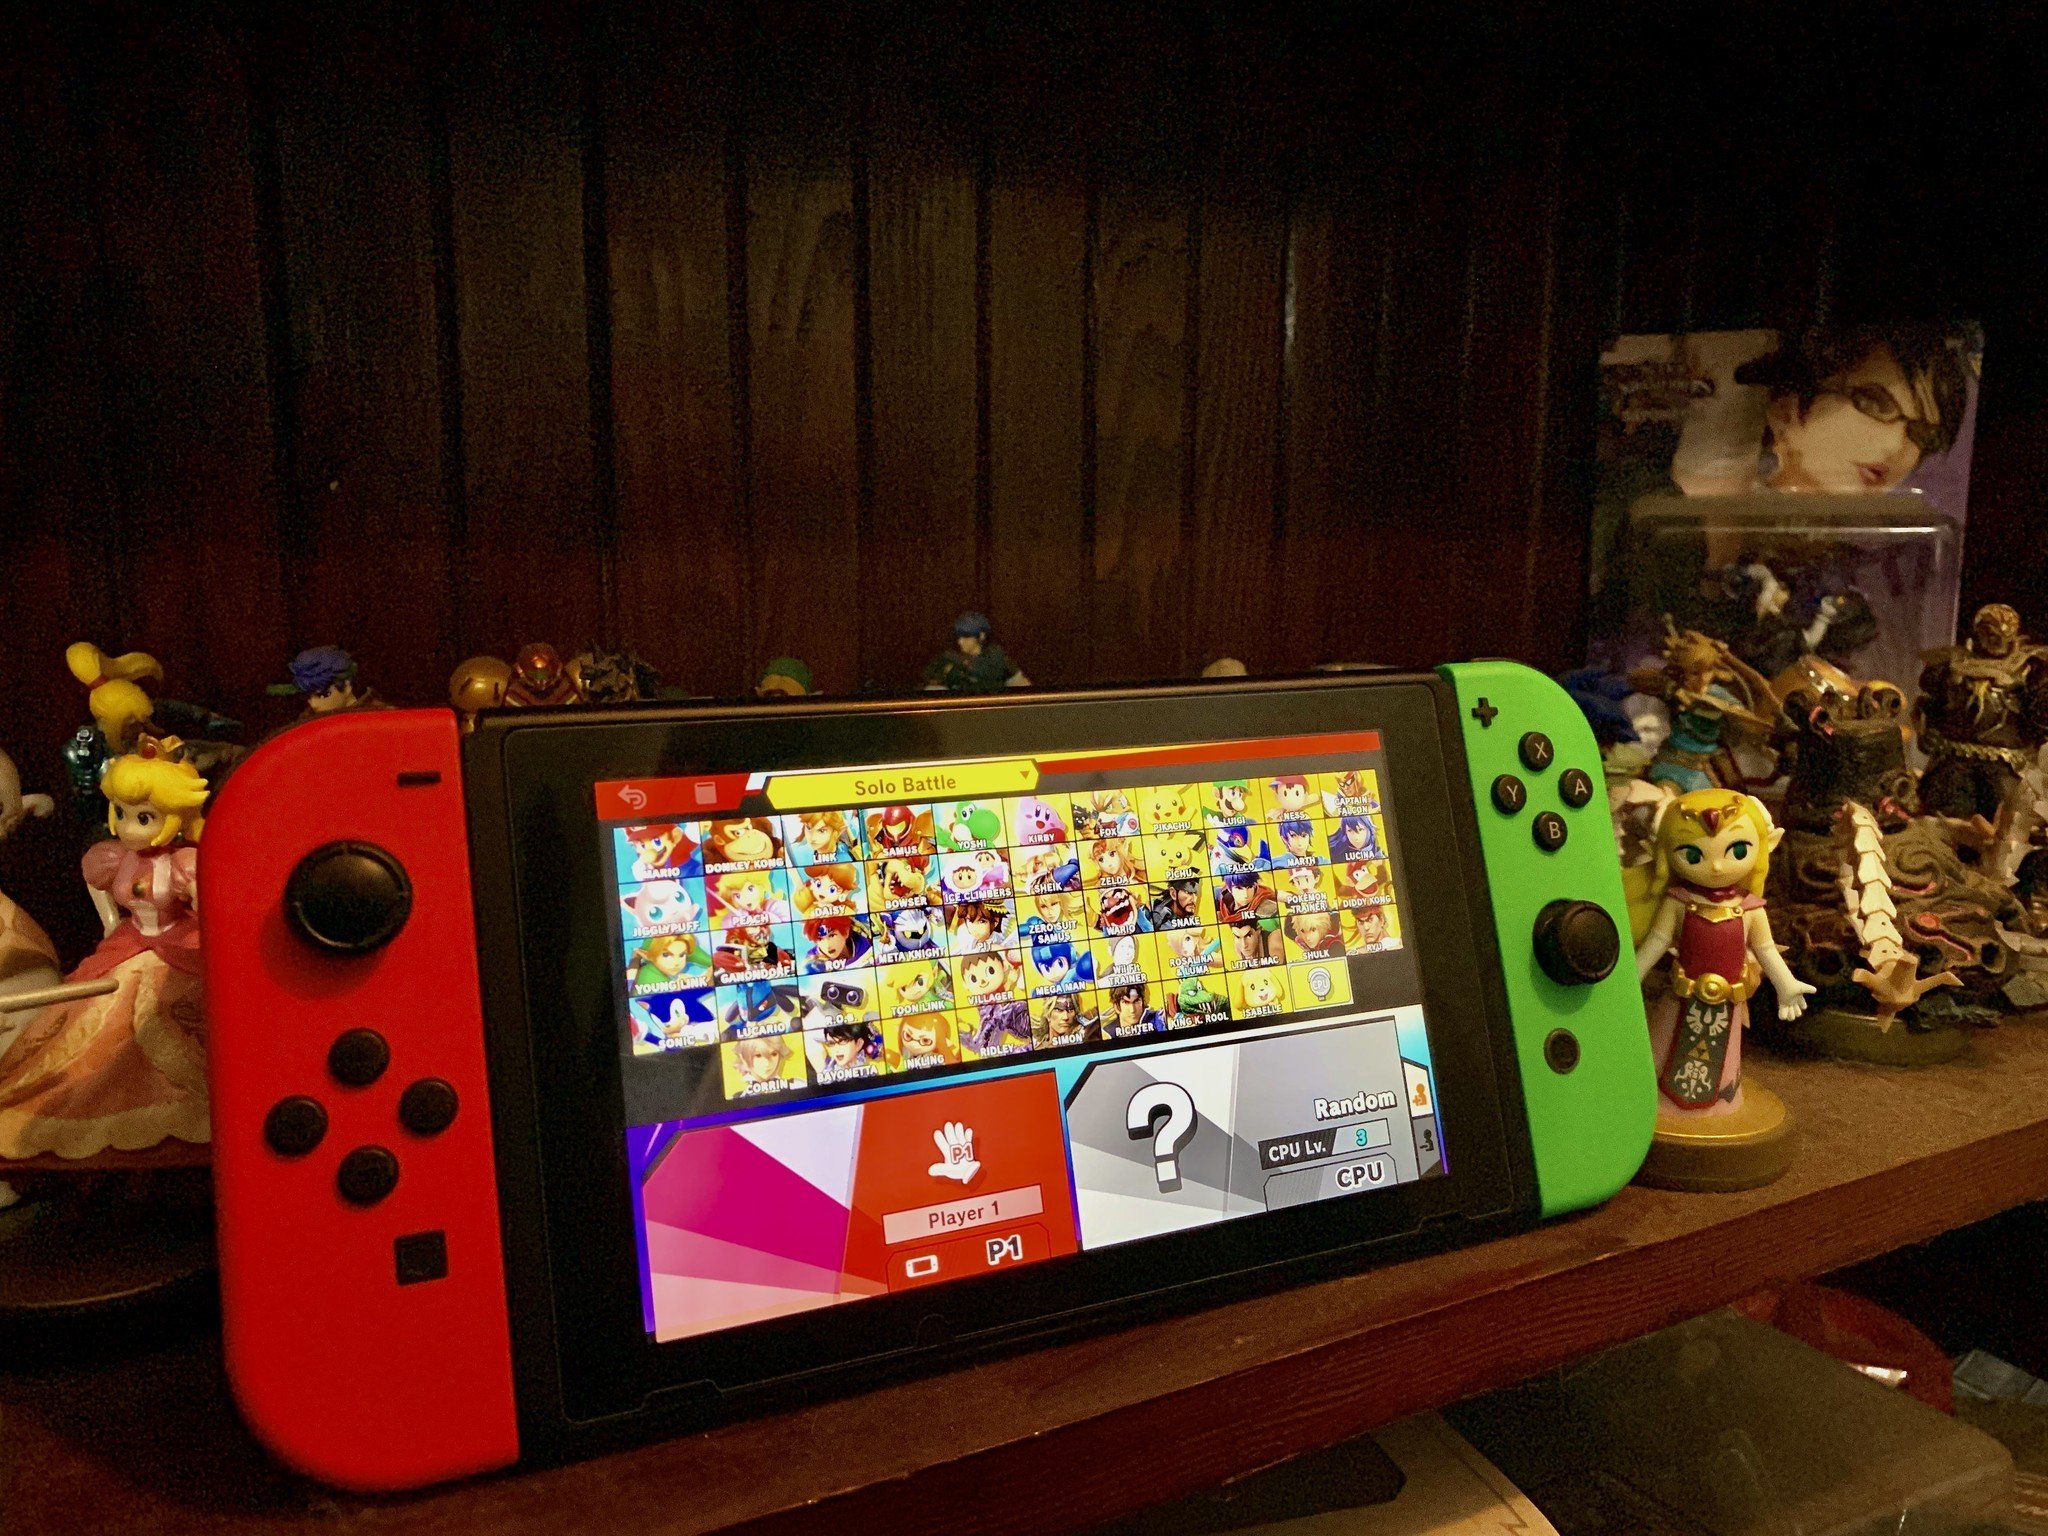 Got a new oled switch, can I transfer the DLC I bought to my new switch? :  r/SmashBrosUltimate